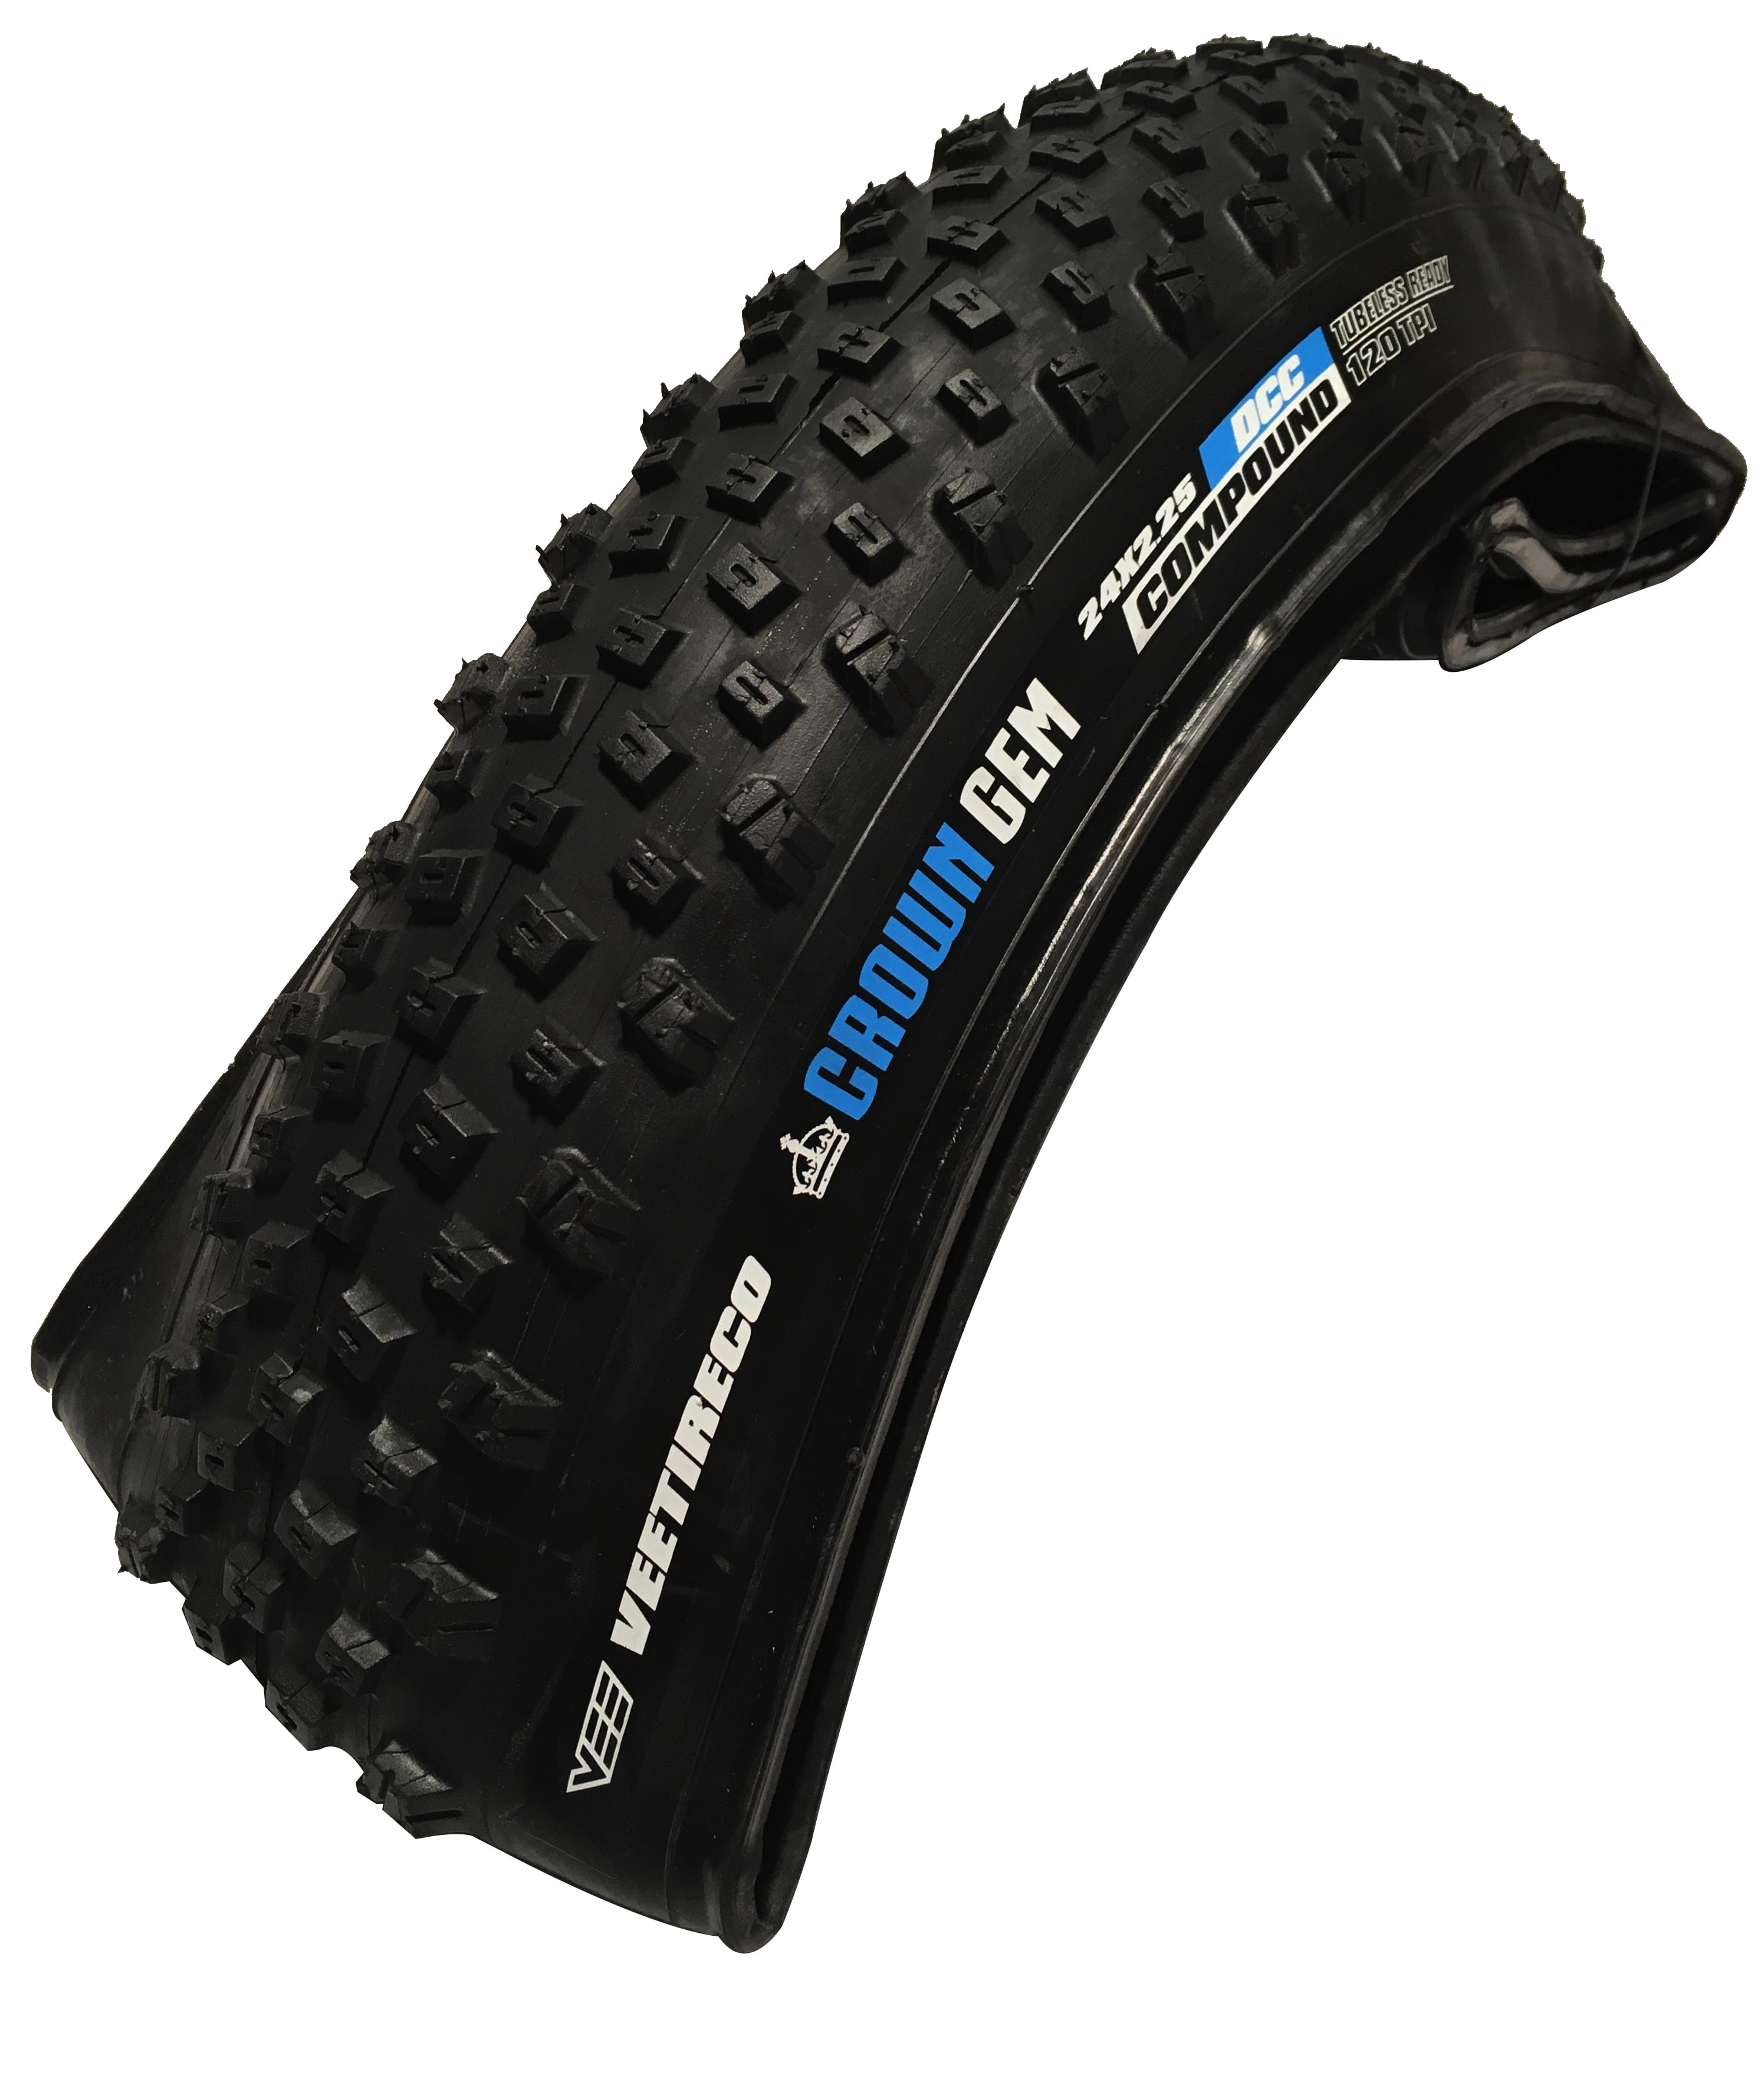 Vee Tire Crown GEM 20x2.25 Bike Tires with Multi Purpose Compound and  Wire Beads. 20 inch MTB Mountain Bike Tire.（並行輸入品） 通販